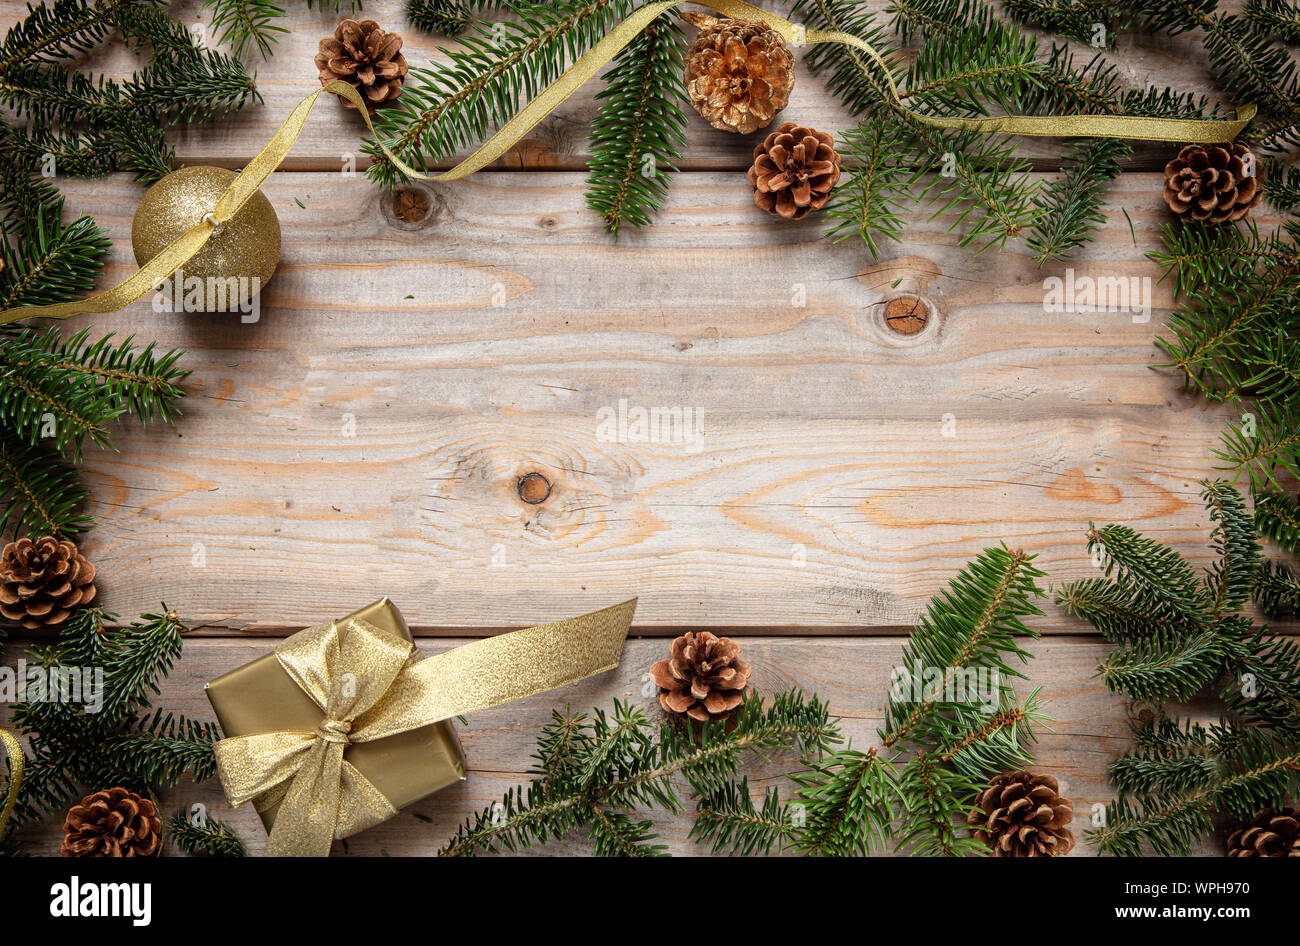 Christmas greenery and decorations against a rustic wood backdrop Stock  Photo - Alamy